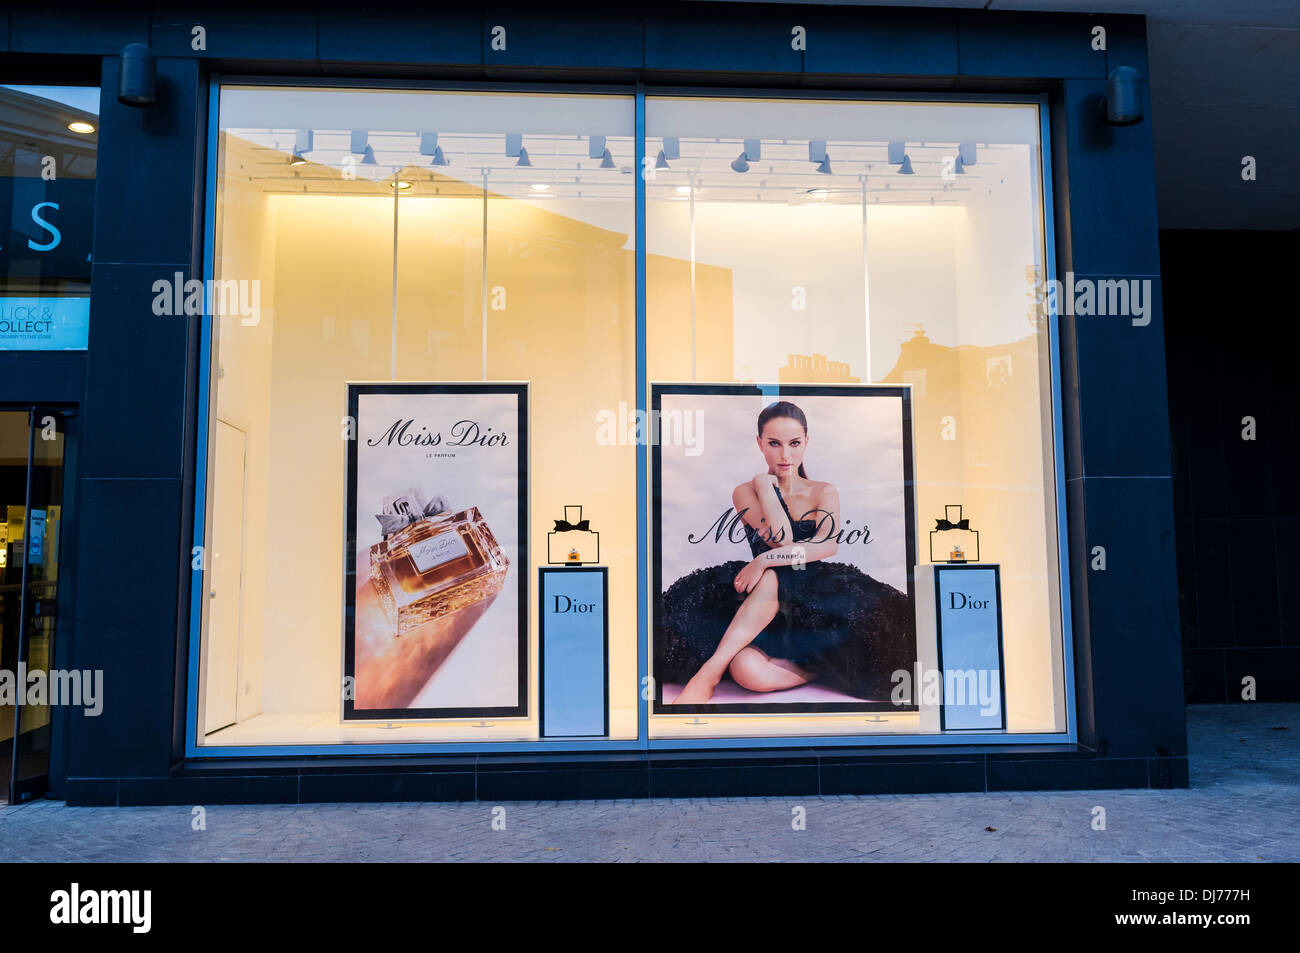 Exeter,Devon. A large show window of a high street store showing an advert featuring Natalie Portman advertising Dior perfume. Stock Photo